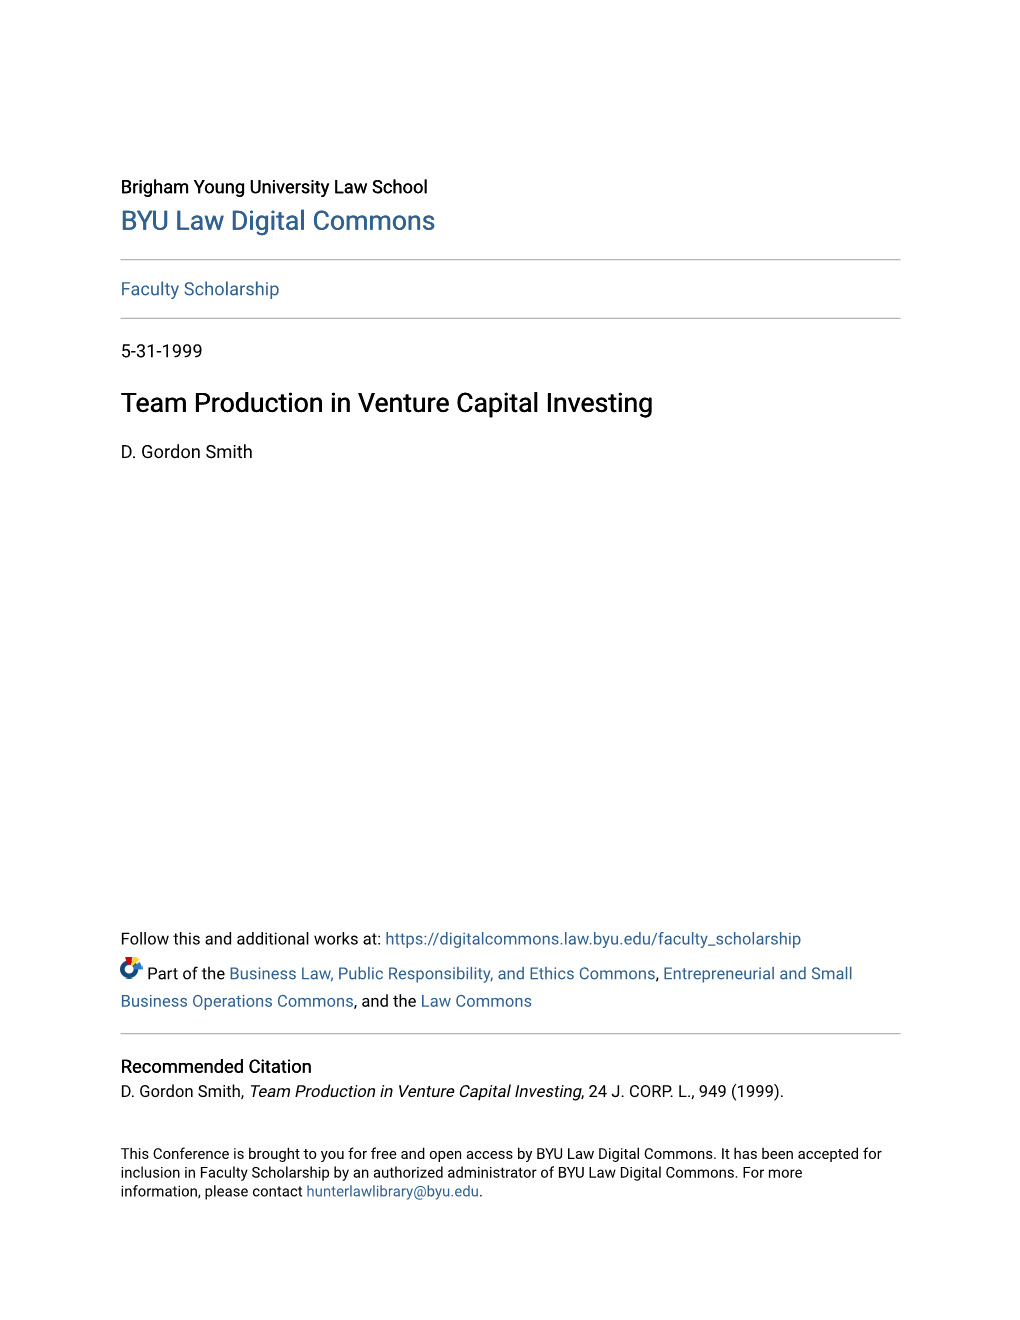 Team Production in Venture Capital Investing